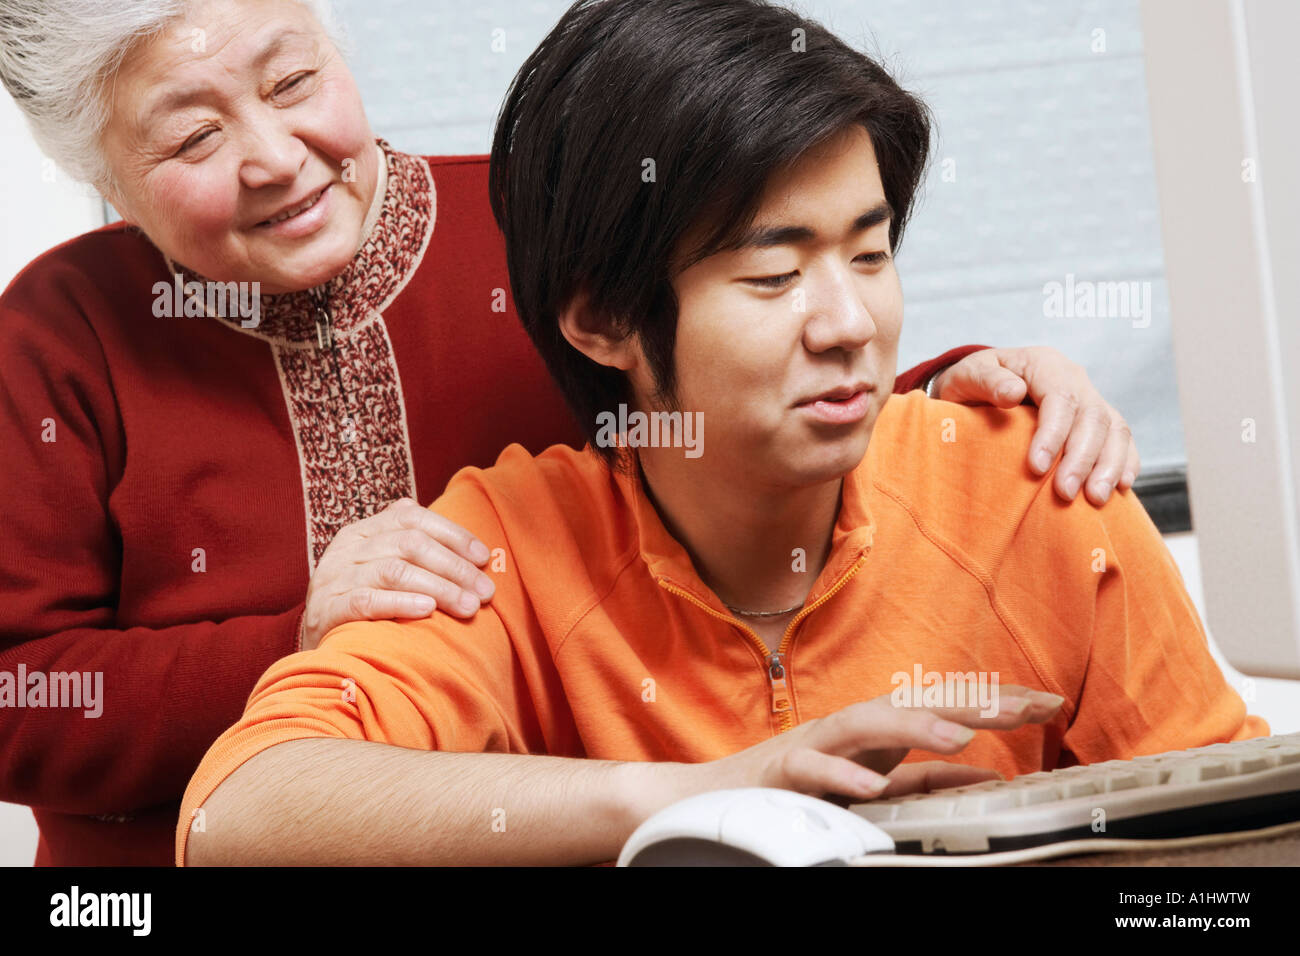 Close-up of a grandson using a computer with his grandmother standing behind him Stock Photo